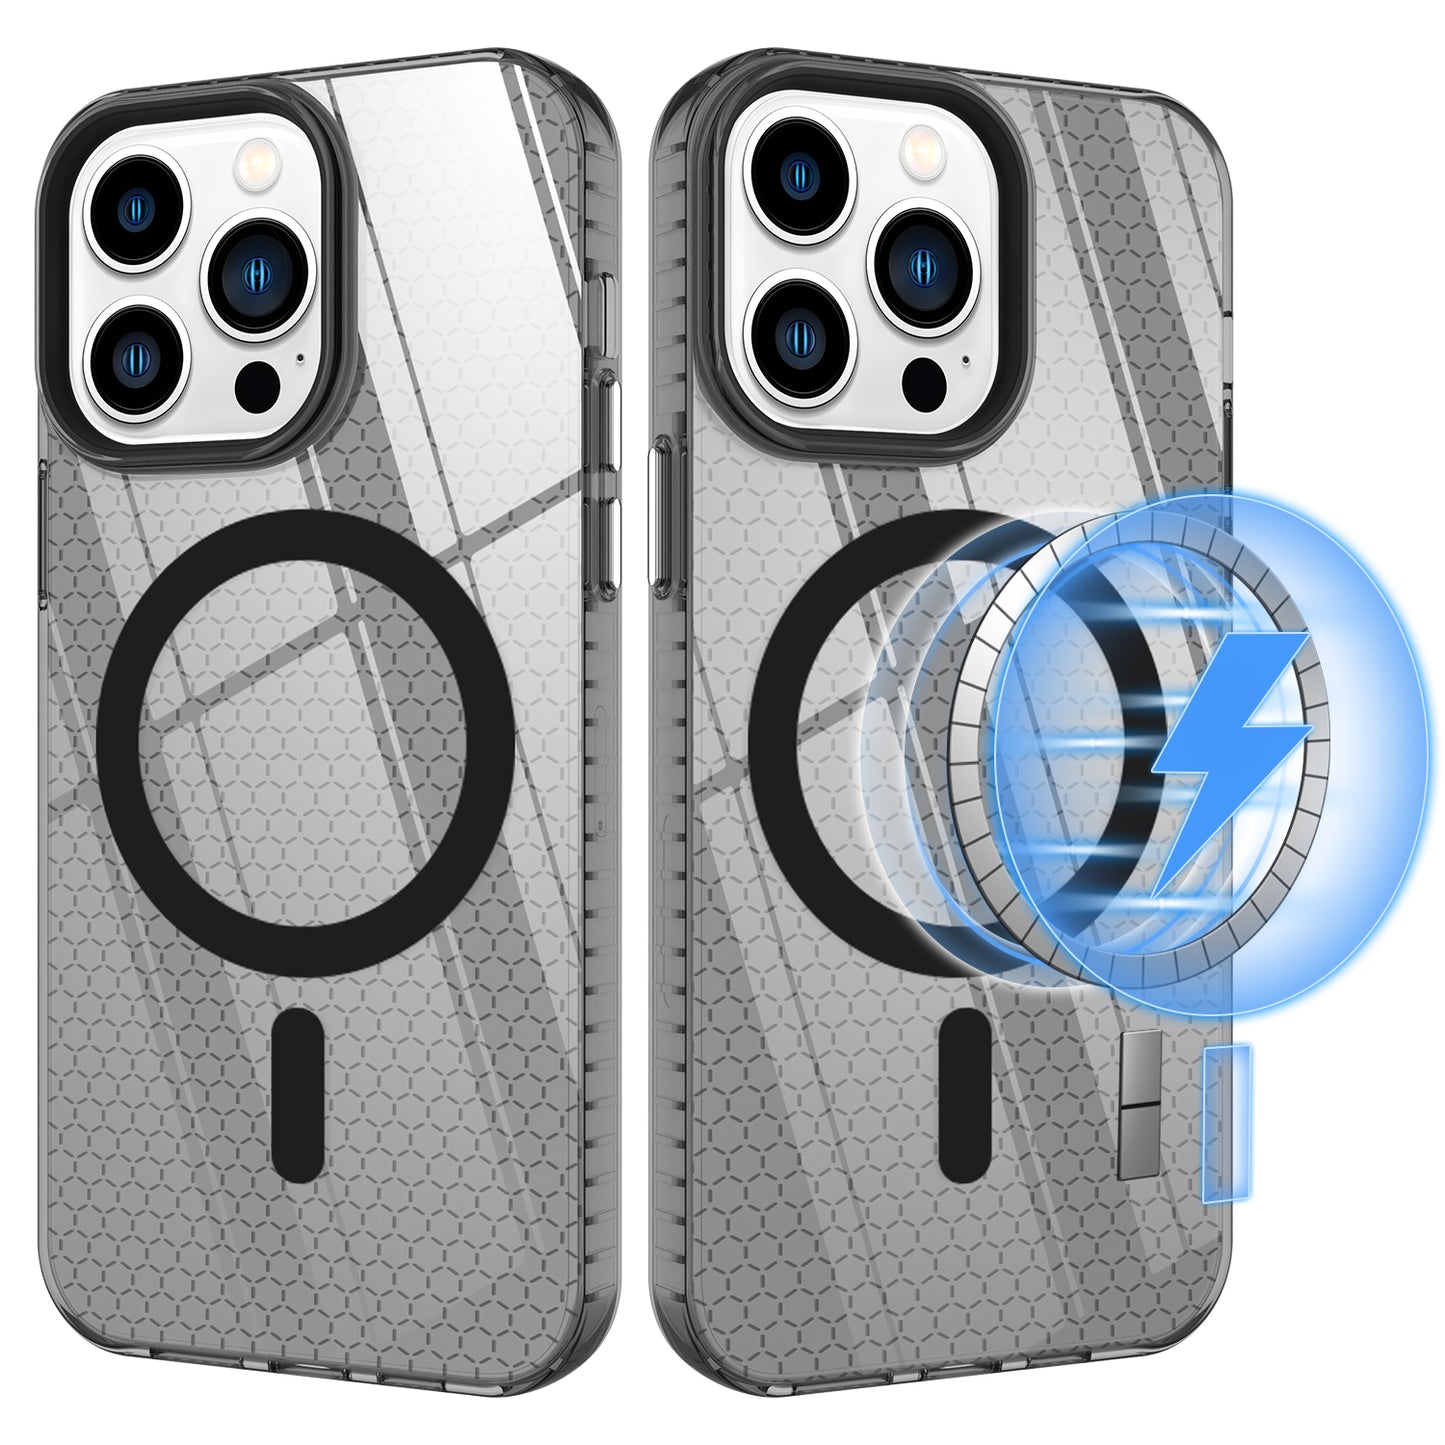 magnetic shockproof black honeycomb wireless charging phone cases for iphone 11 pro max